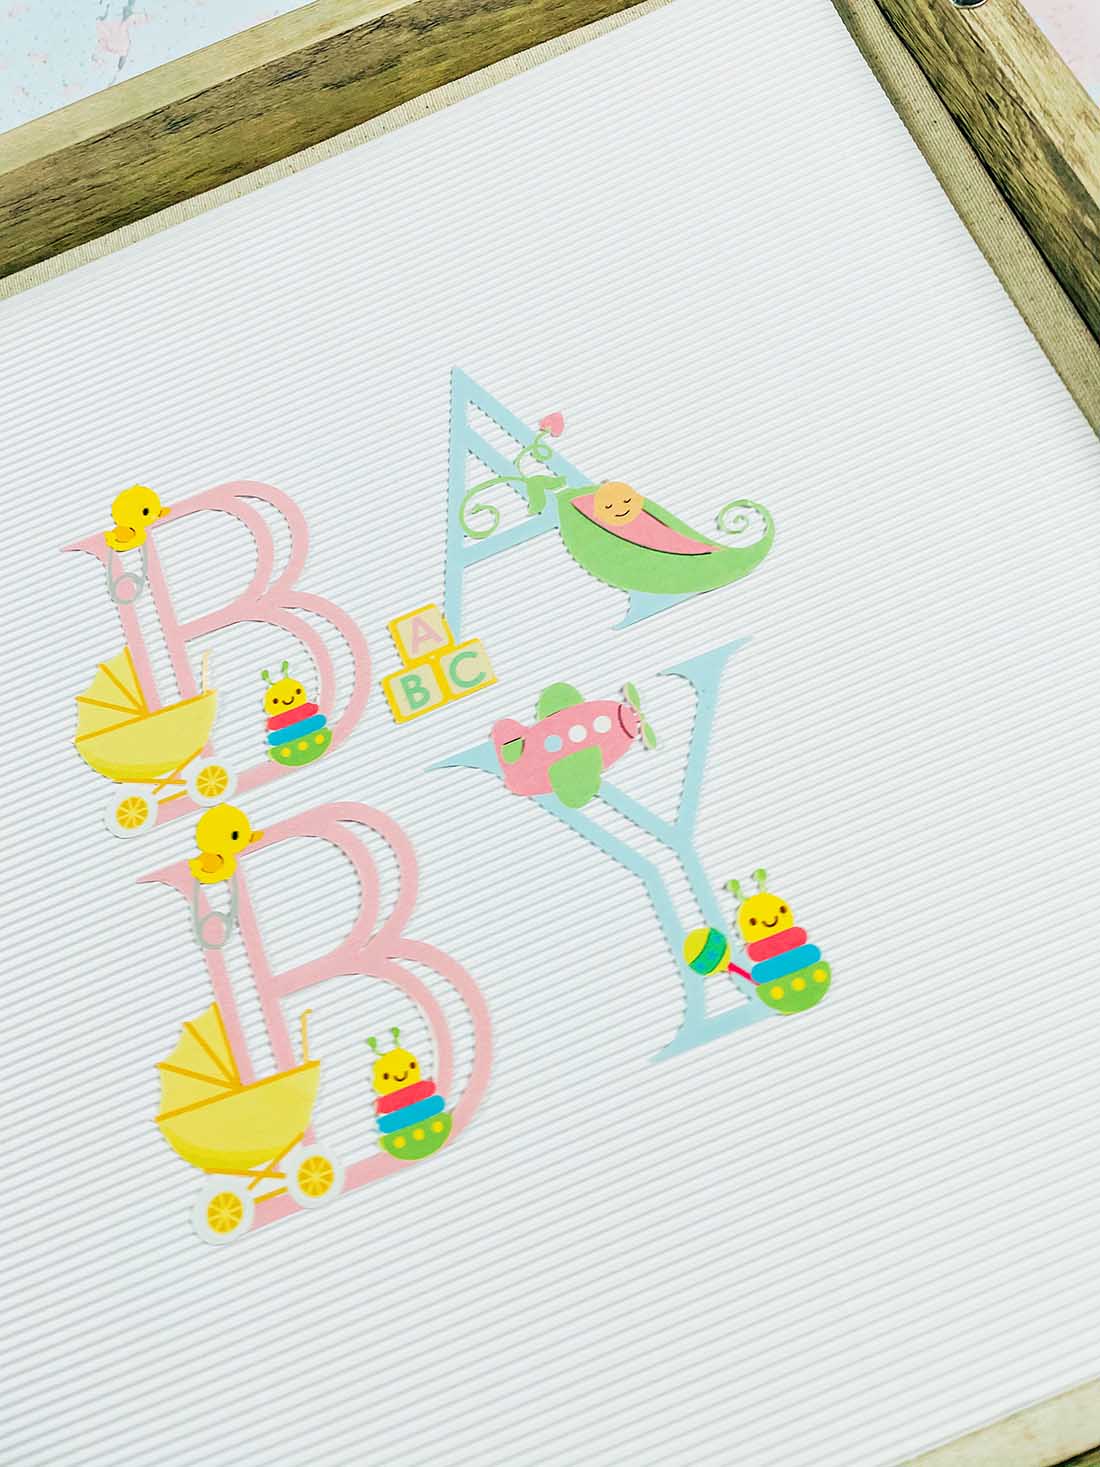 Printable baby Alphabet for creating Cricut Baby gifts